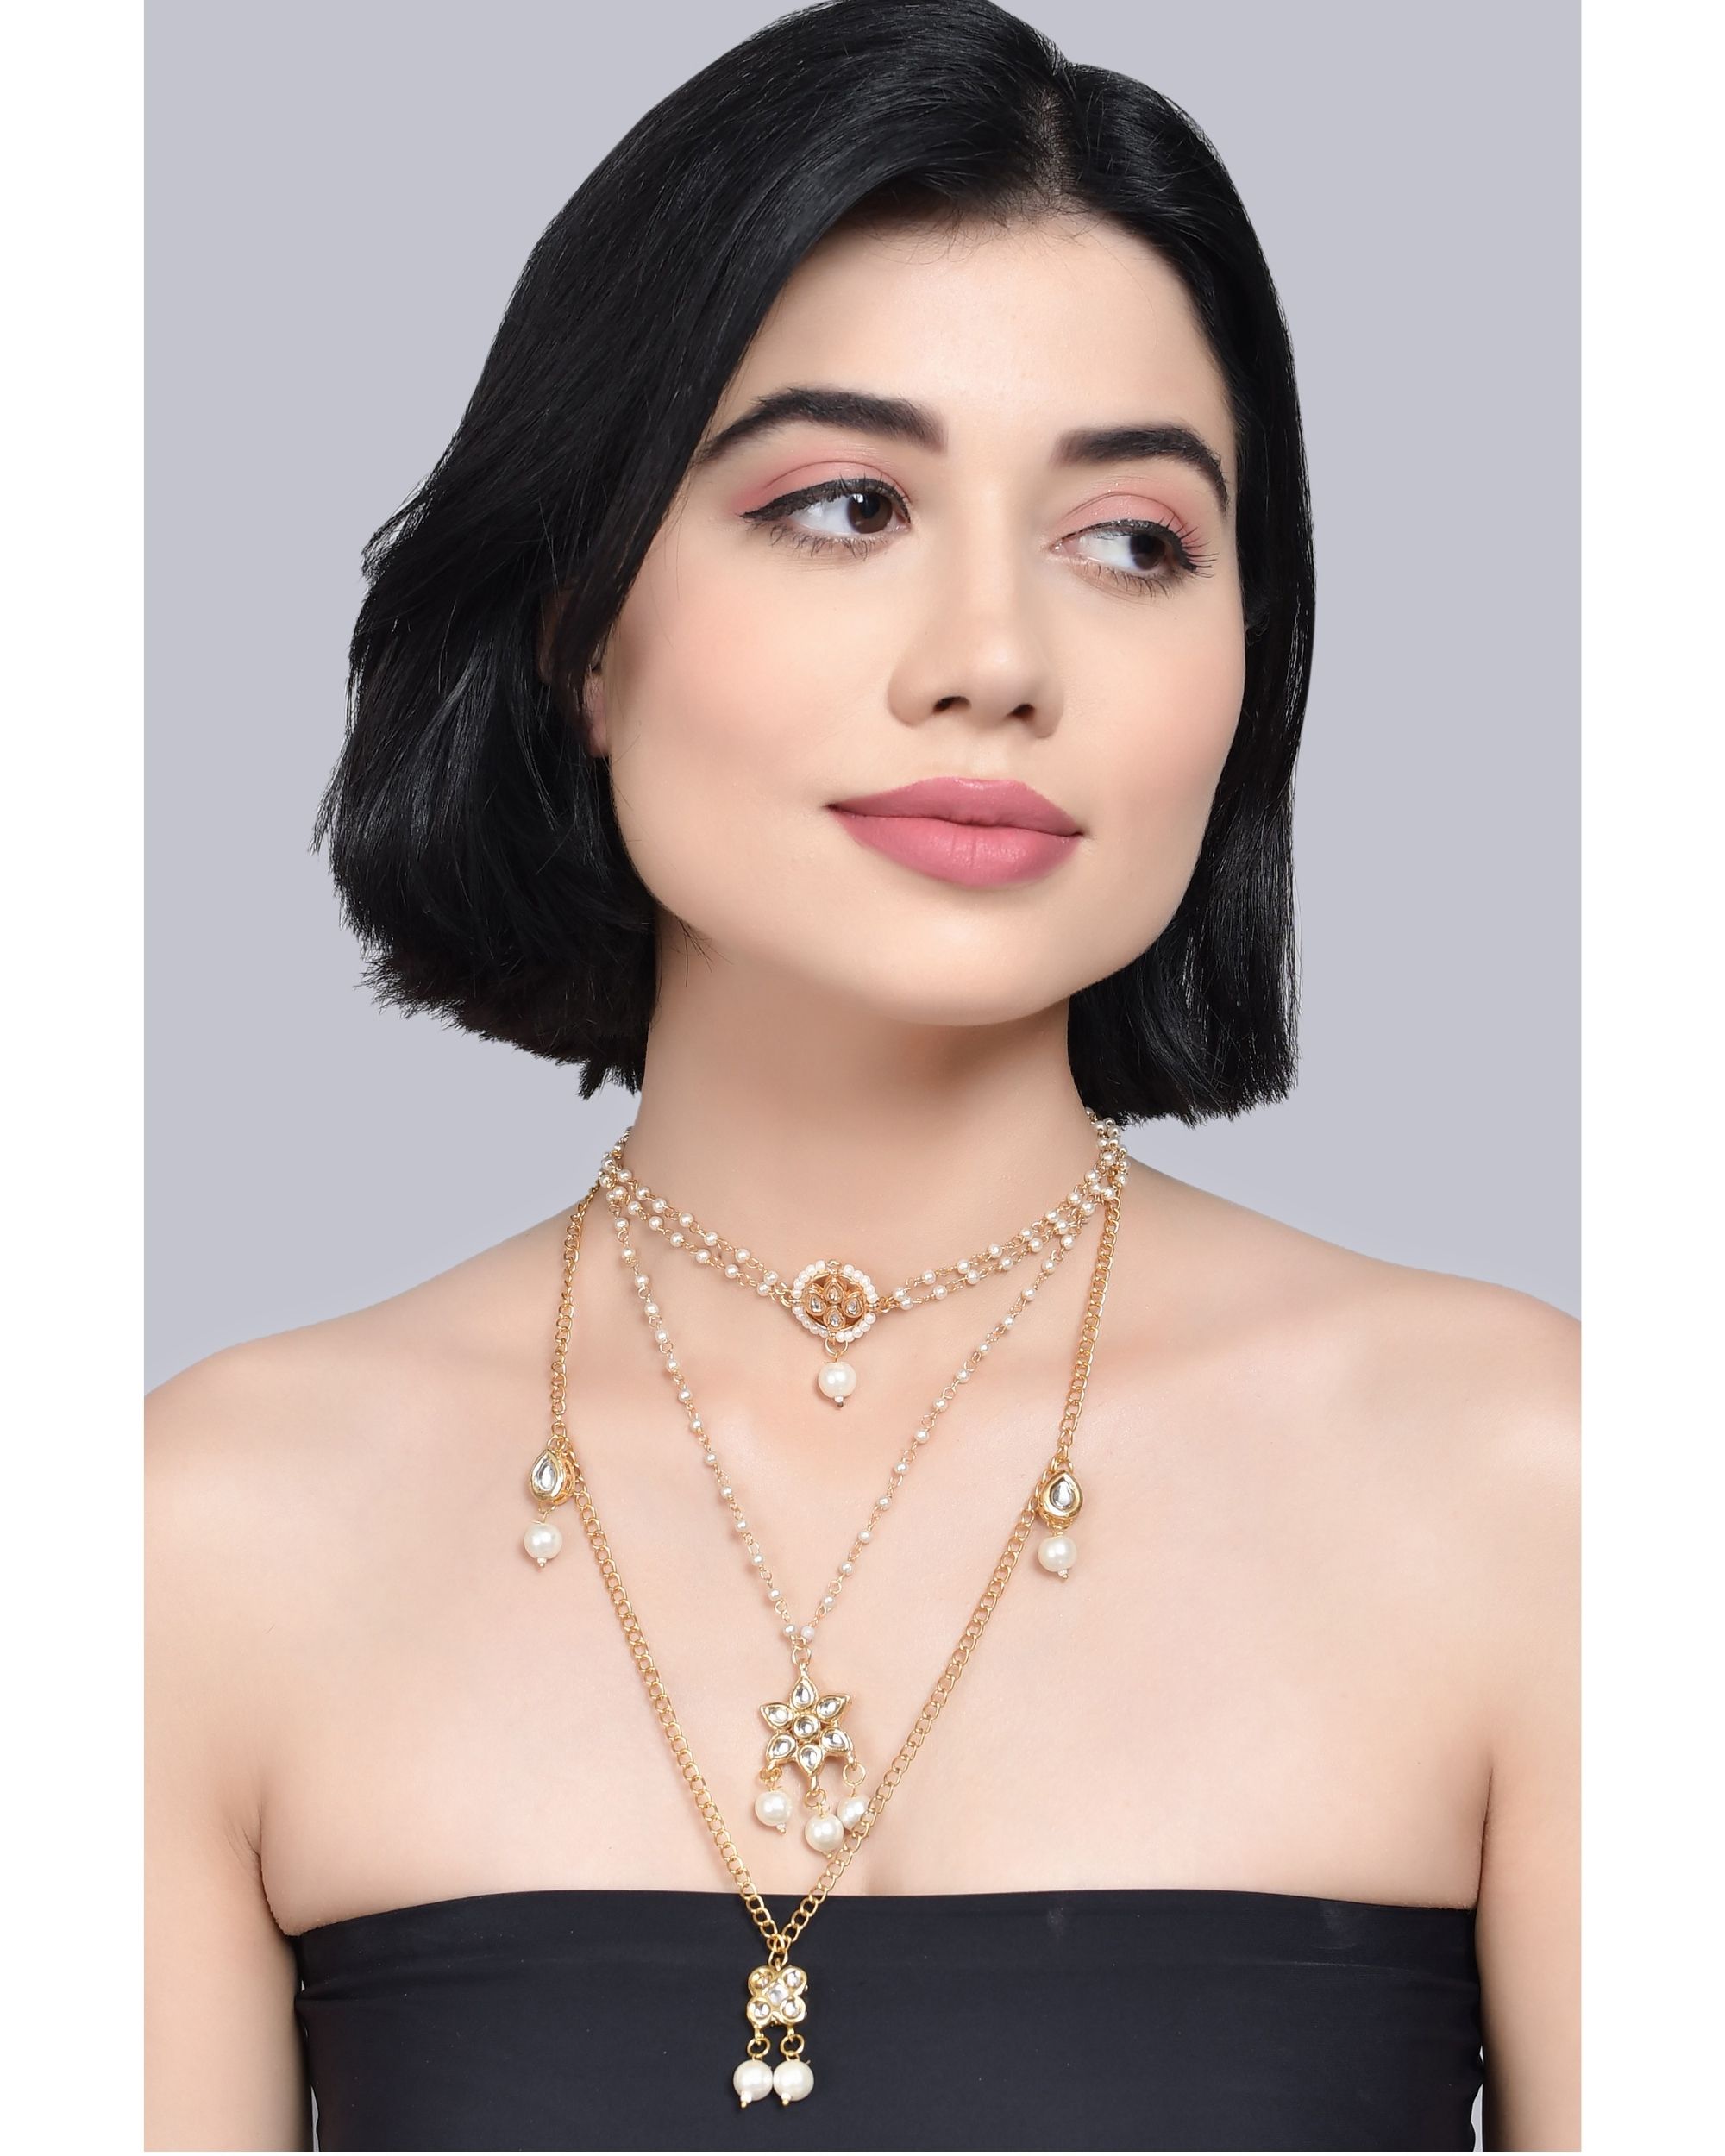 Multilayered pearl beaded kundan embellished necklace teamed with choker